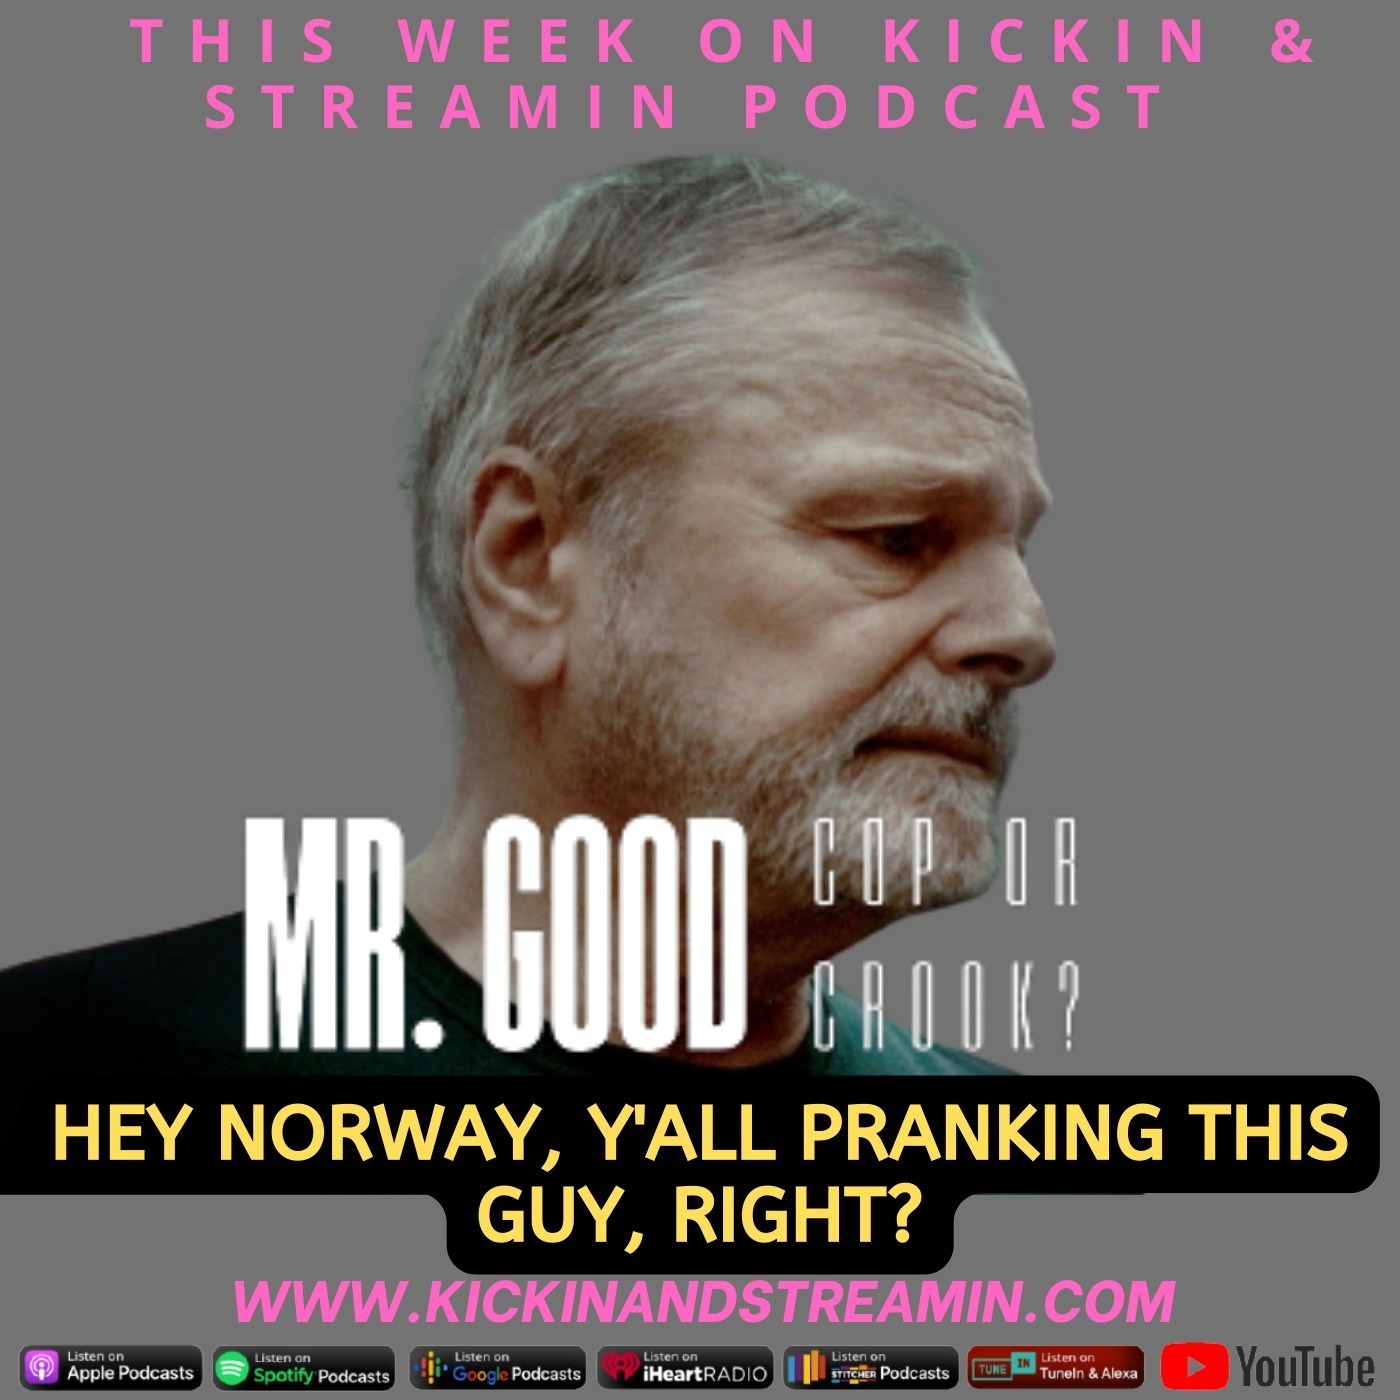 Mr. Good: Cop or Crook. Hey Norway, Y'all Pranking This Guy, Right?